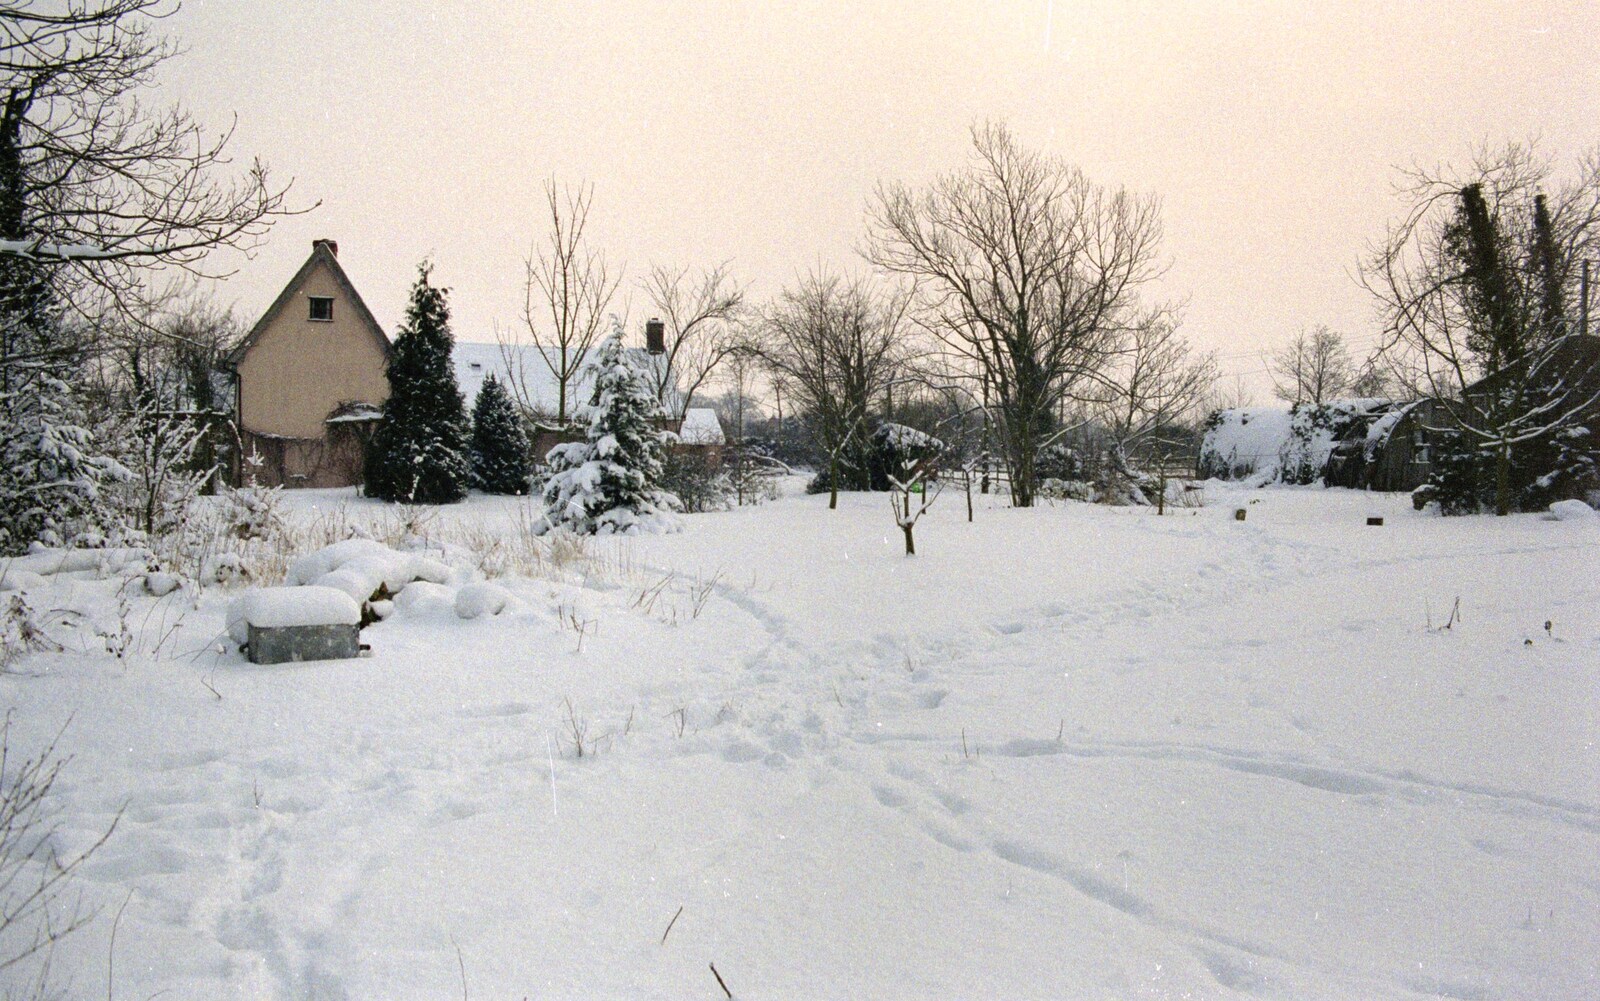 Geoff and Brenda's garden from Snow Days, Stuston and Norwich, Suffolk and Norfolk - 4th February 1991